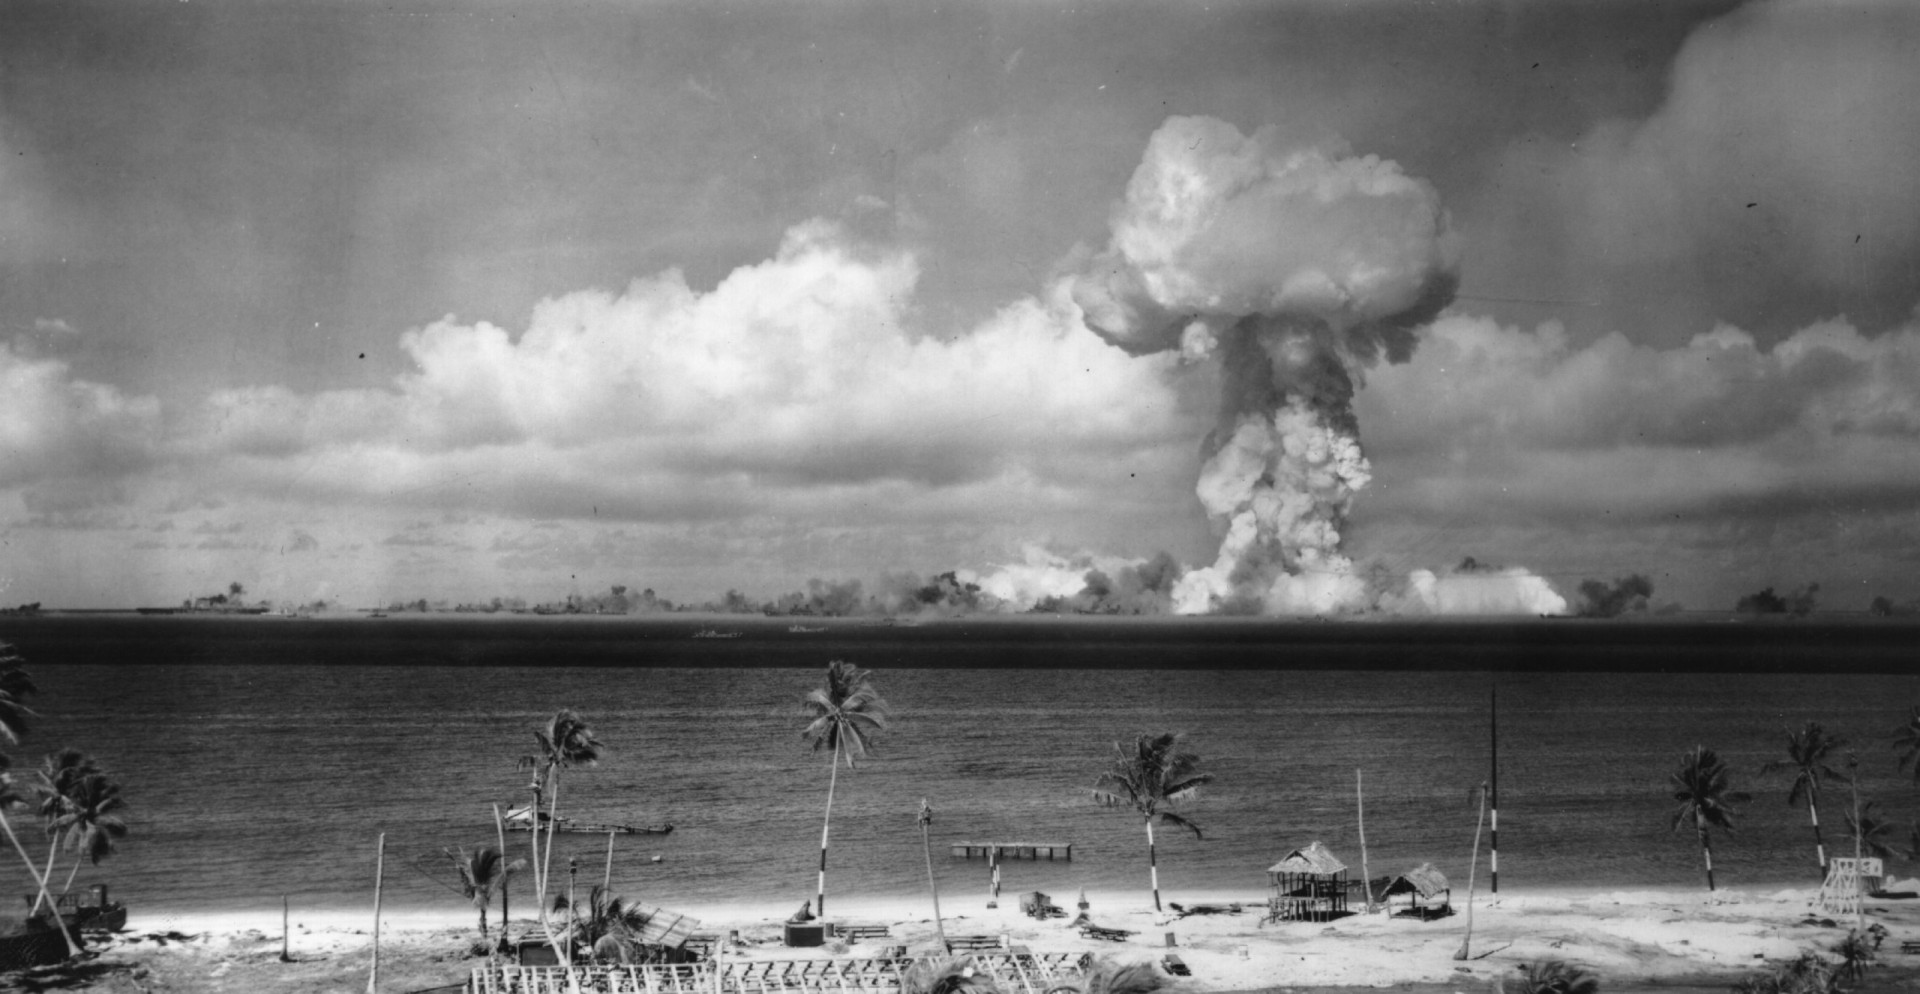 <p>Under the lagoon, you'll find the remains of nearly a dozen ships sunk during Operation Crossroads in 1946. Bikini Atoll itself is safe to visit, but avoid eating the coconuts!</p><p><a href="https://www.msn.com/en-us/community/channel/vid-7xx8mnucu55yw63we9va2gwr7uihbxwc68fxqp25x6tg4ftibpra?cvid=94631541bc0f4f89bfd59158d696ad7e">Follow us and access great exclusive content every day</a></p>